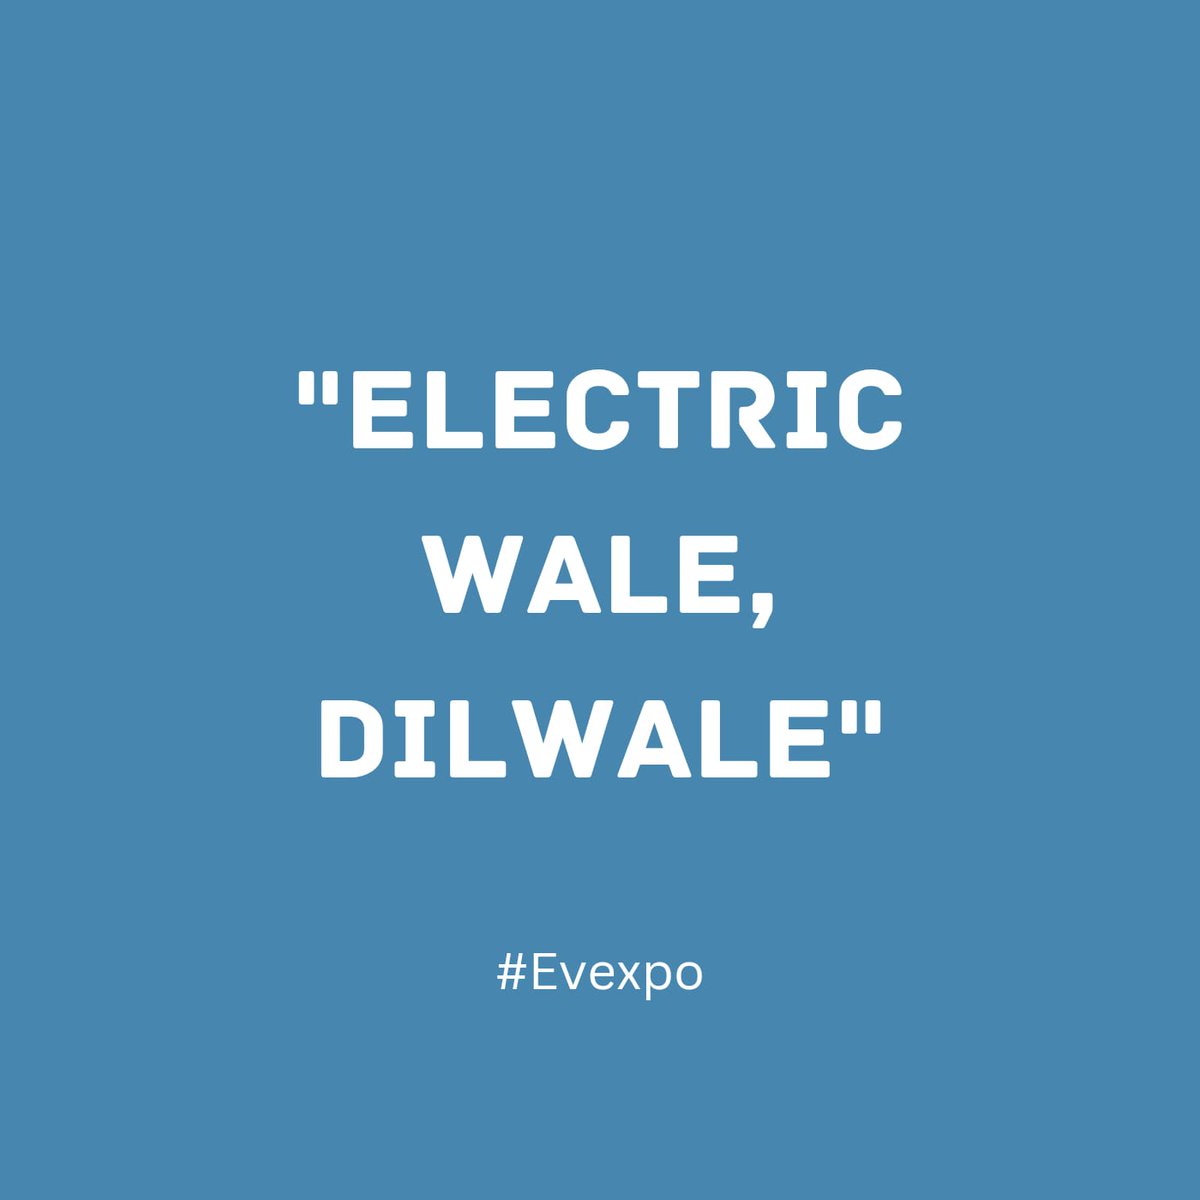 'Sparking joy and miles ahead with Electric Wale, Dilwale! ⚡🚗